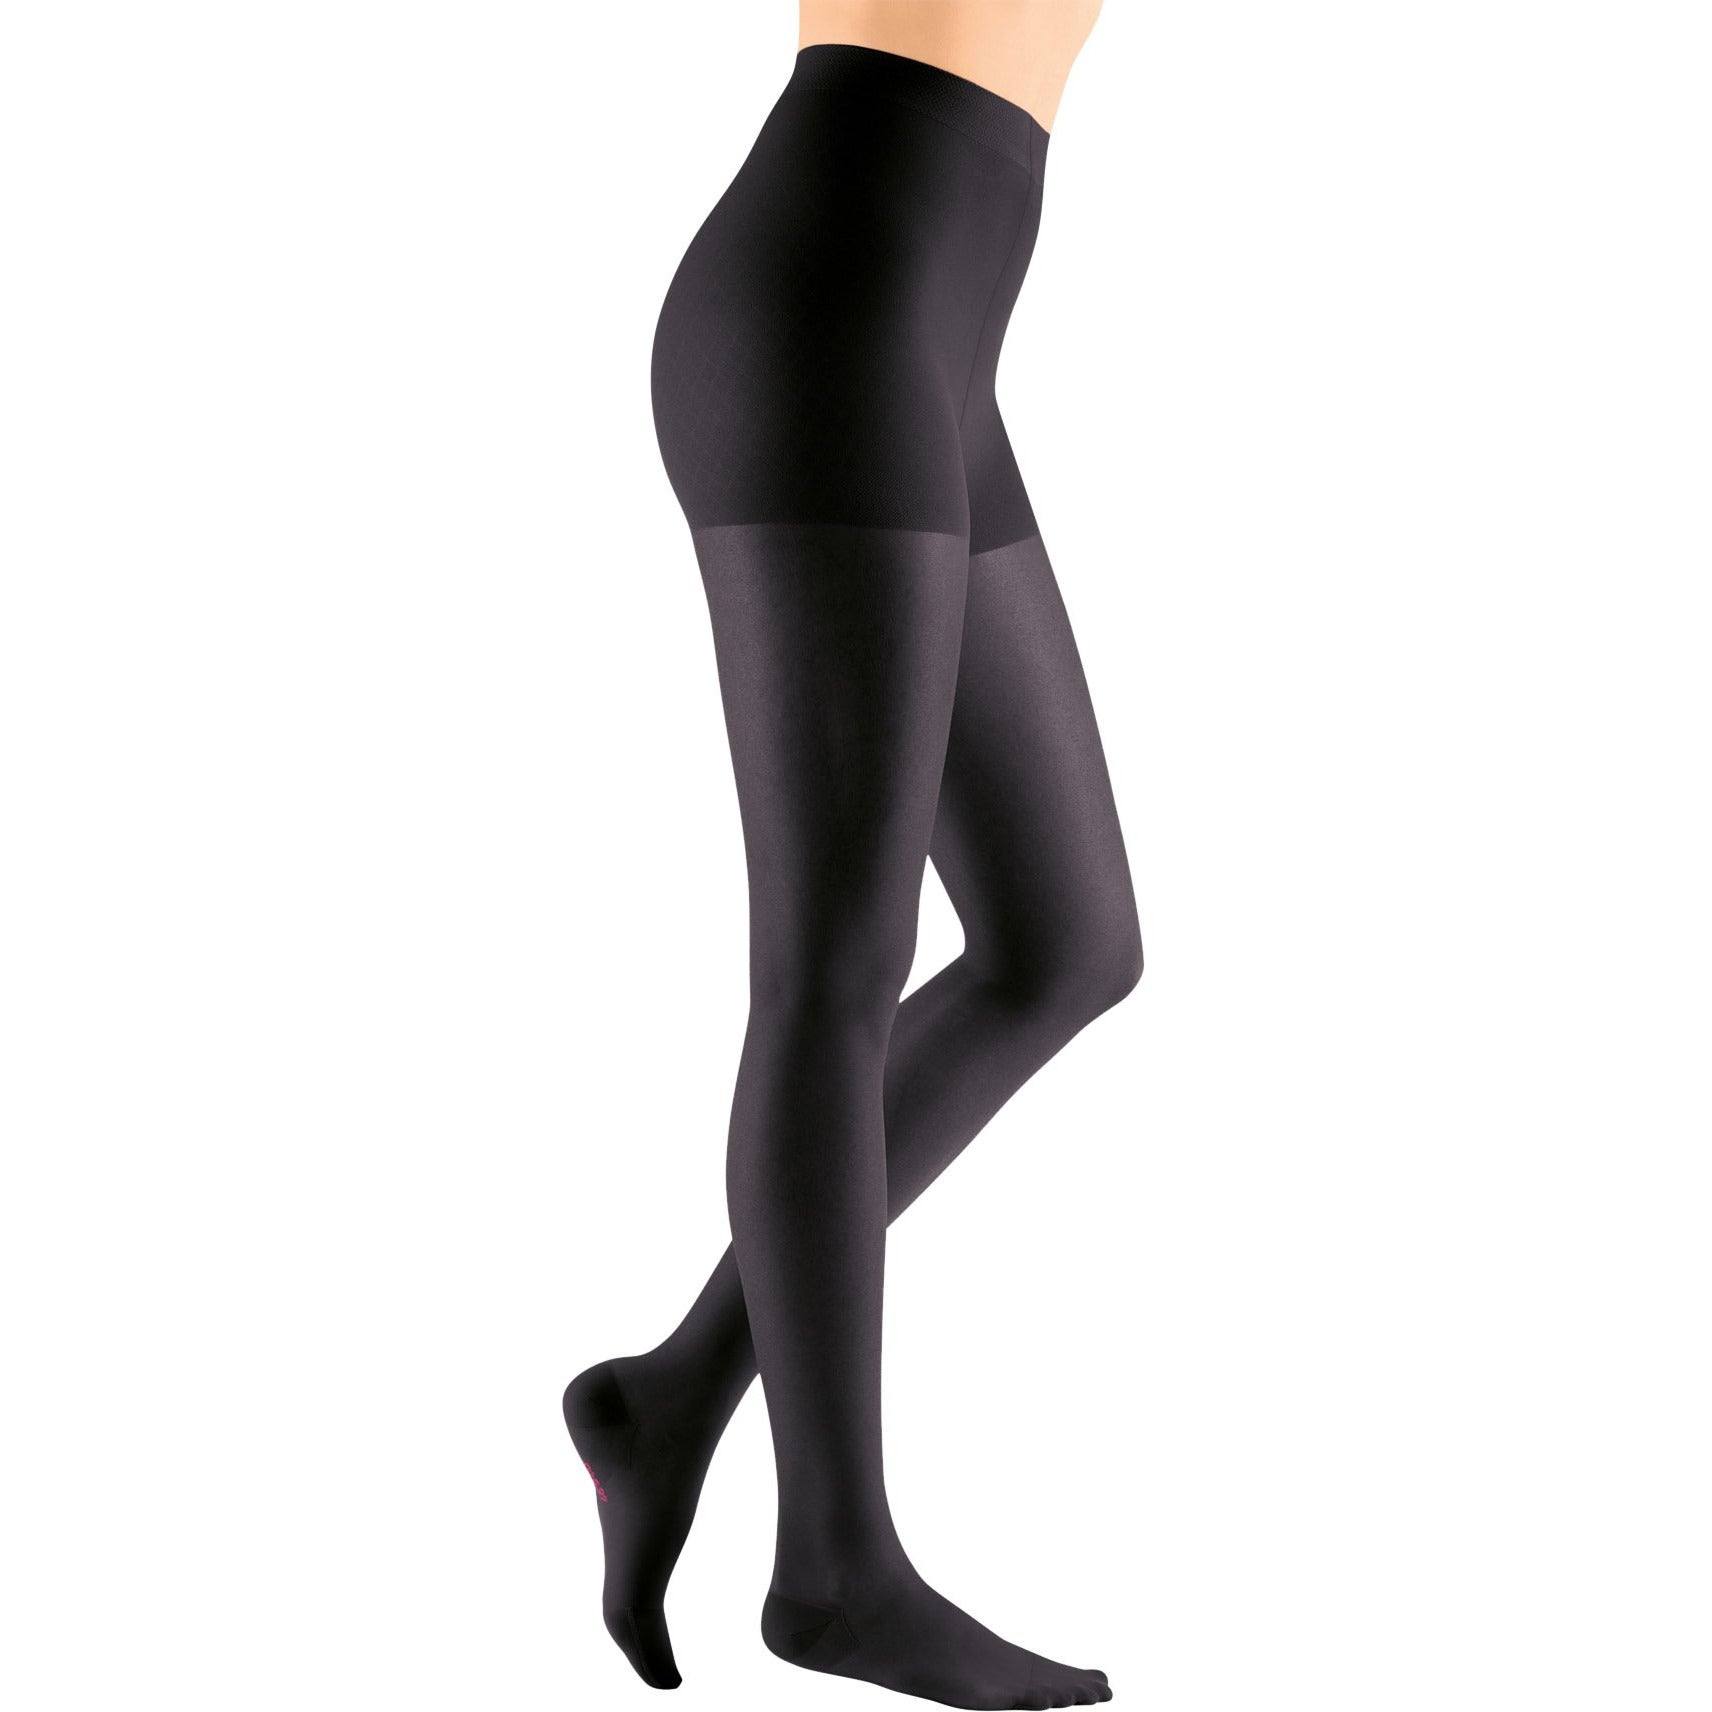 Moderate Support Sheer Maternity Pantyhose